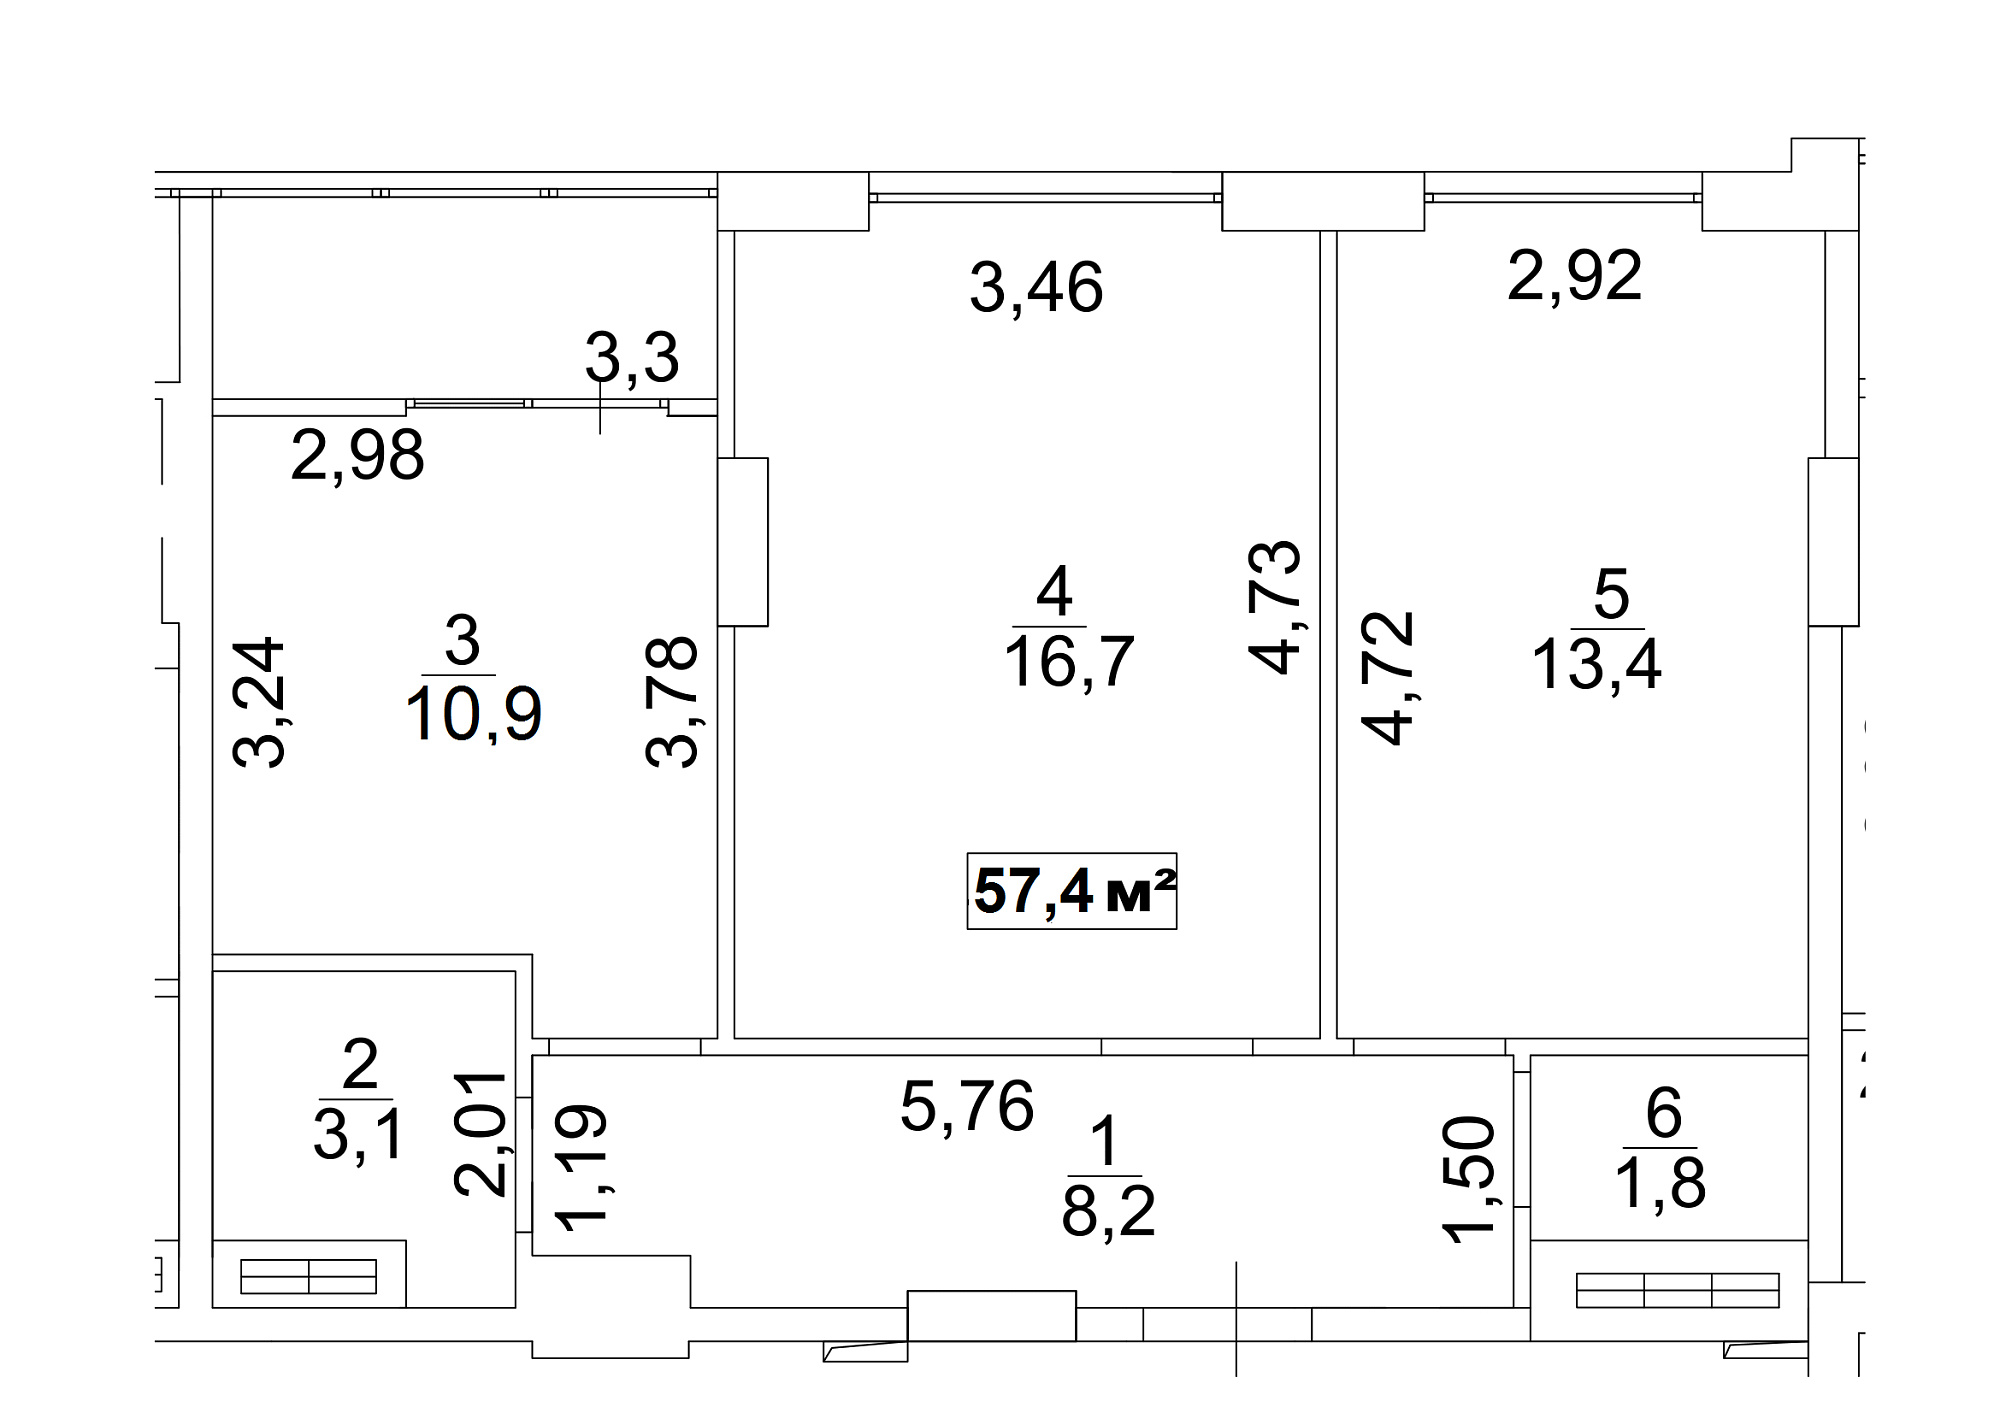 Planning 2-rm flats area 57.4m2, AB-13-06/00046.